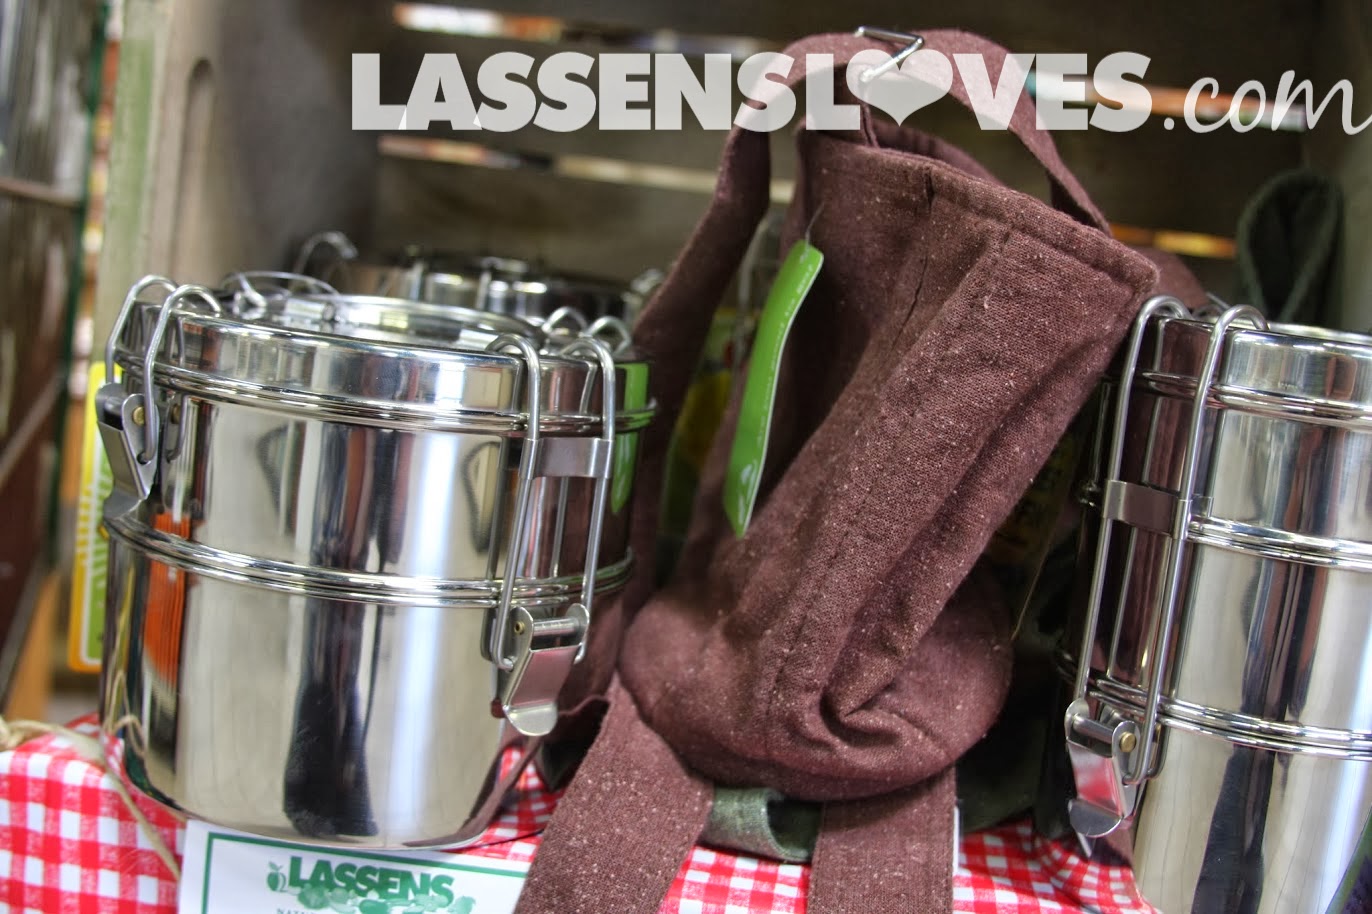 lassensloves.com, Lassen's, Lassens, healthy+lunches, lunch+ideas, lunch+rolls, lunch+pockets, lunch+boxes